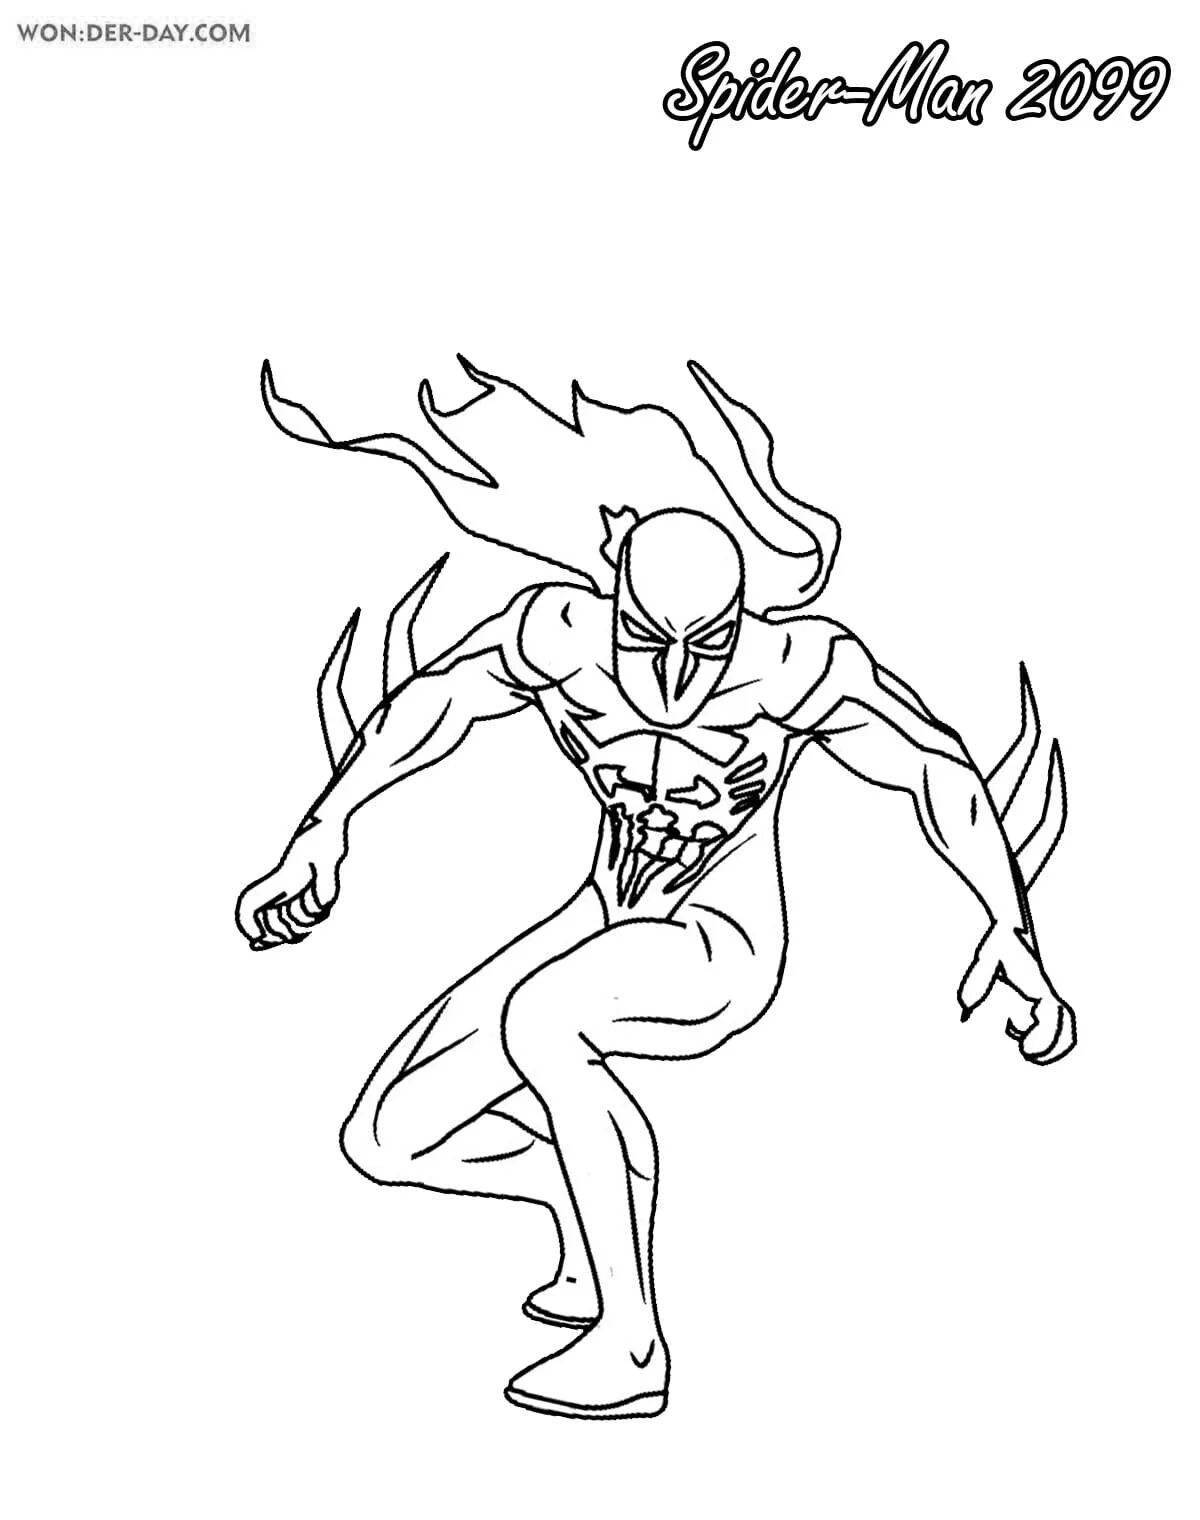 Coloring page shining fiery man